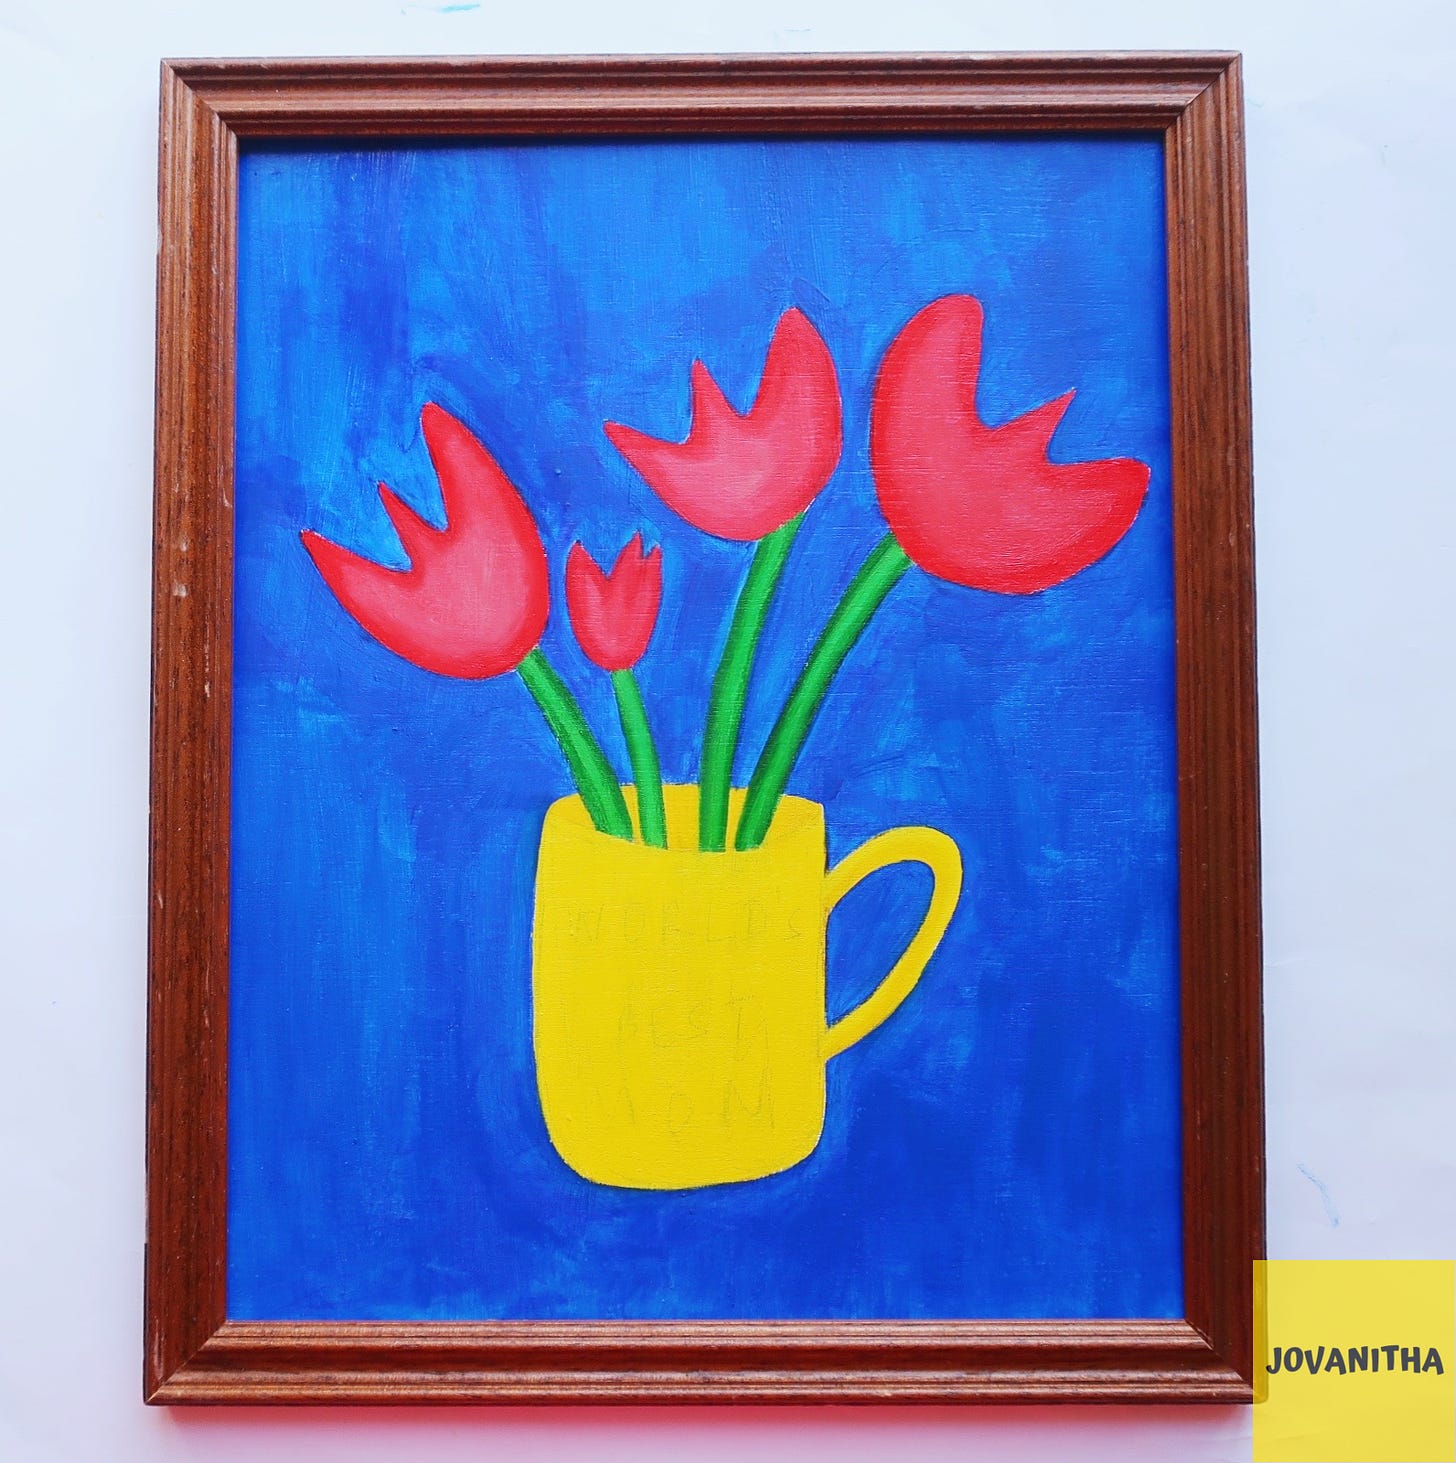 An oil painting of four red tulips in a yellow mug on a blue background in a thrifted frame